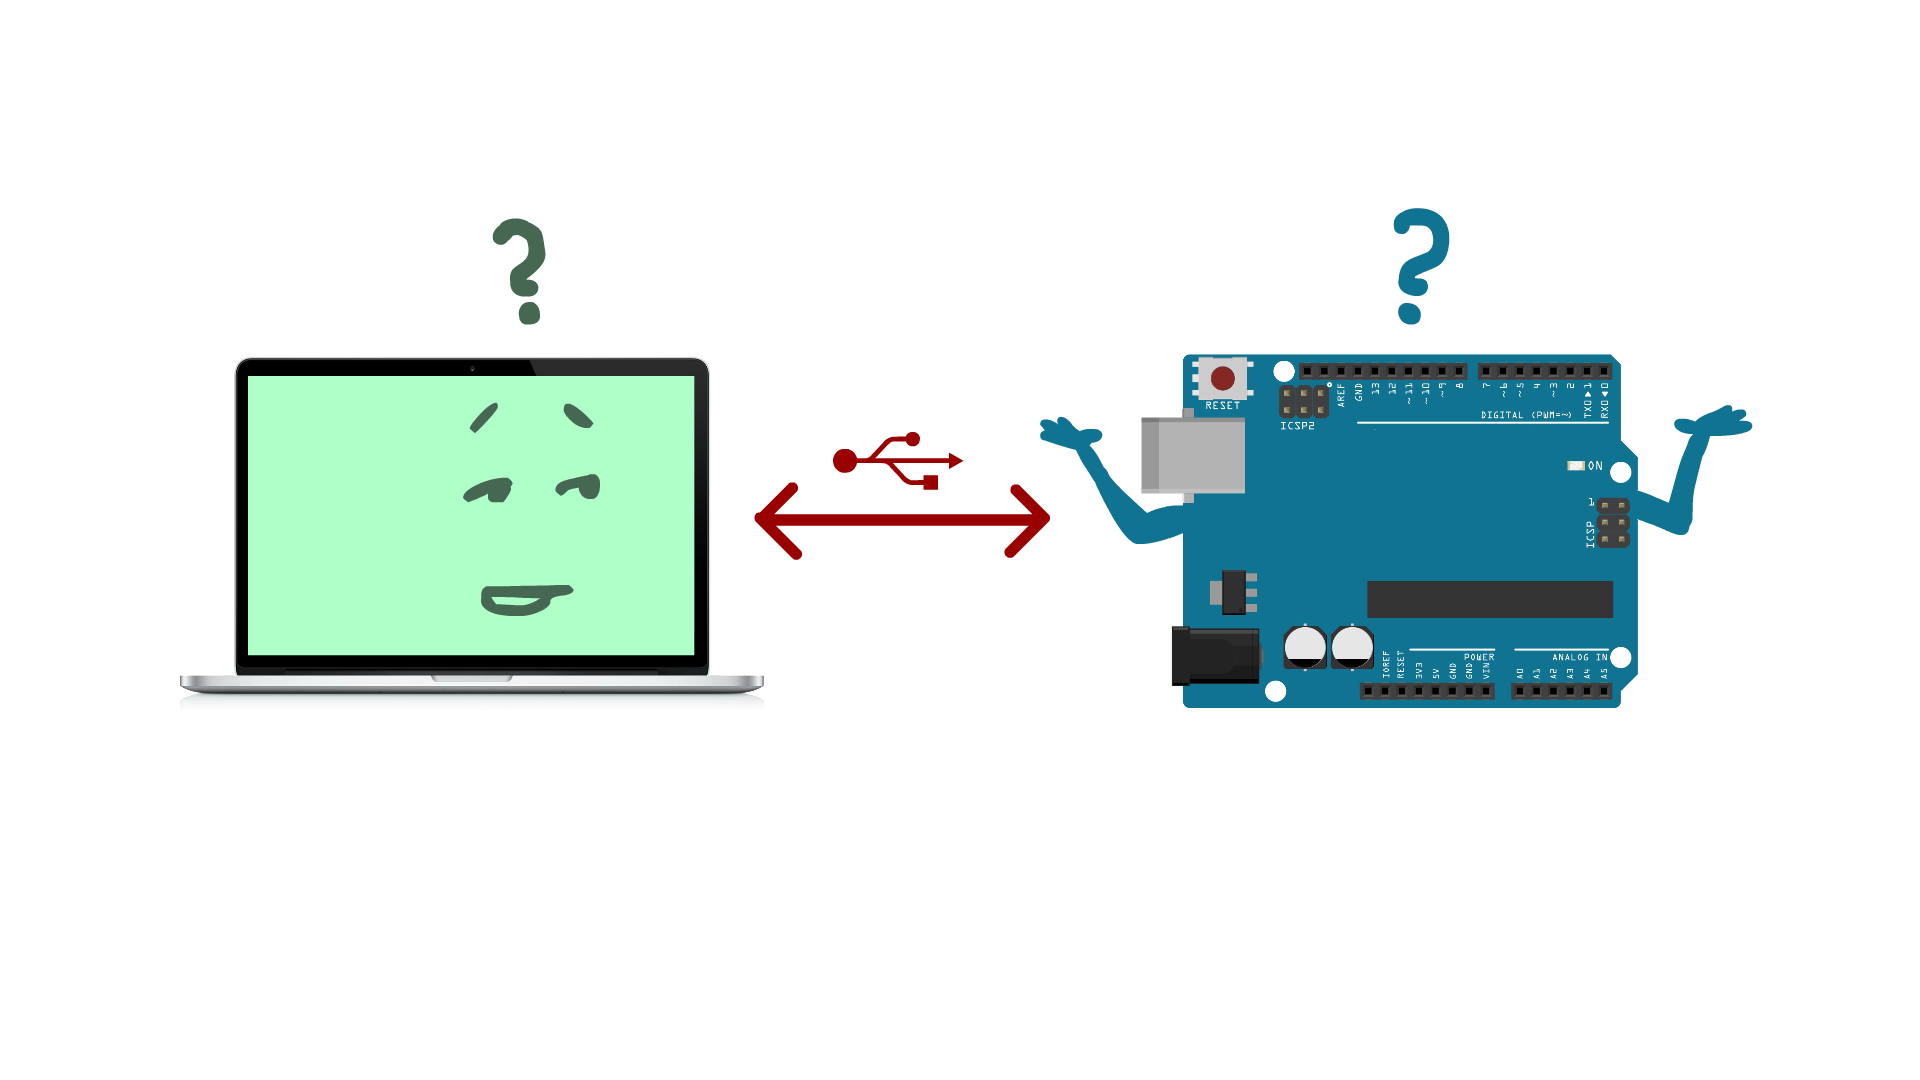 illustration of an Arduino and laptop confused about how to speak to one another. The laptop has an awkward facial expression, and the Arduino is throwing its arms up in a confused manner